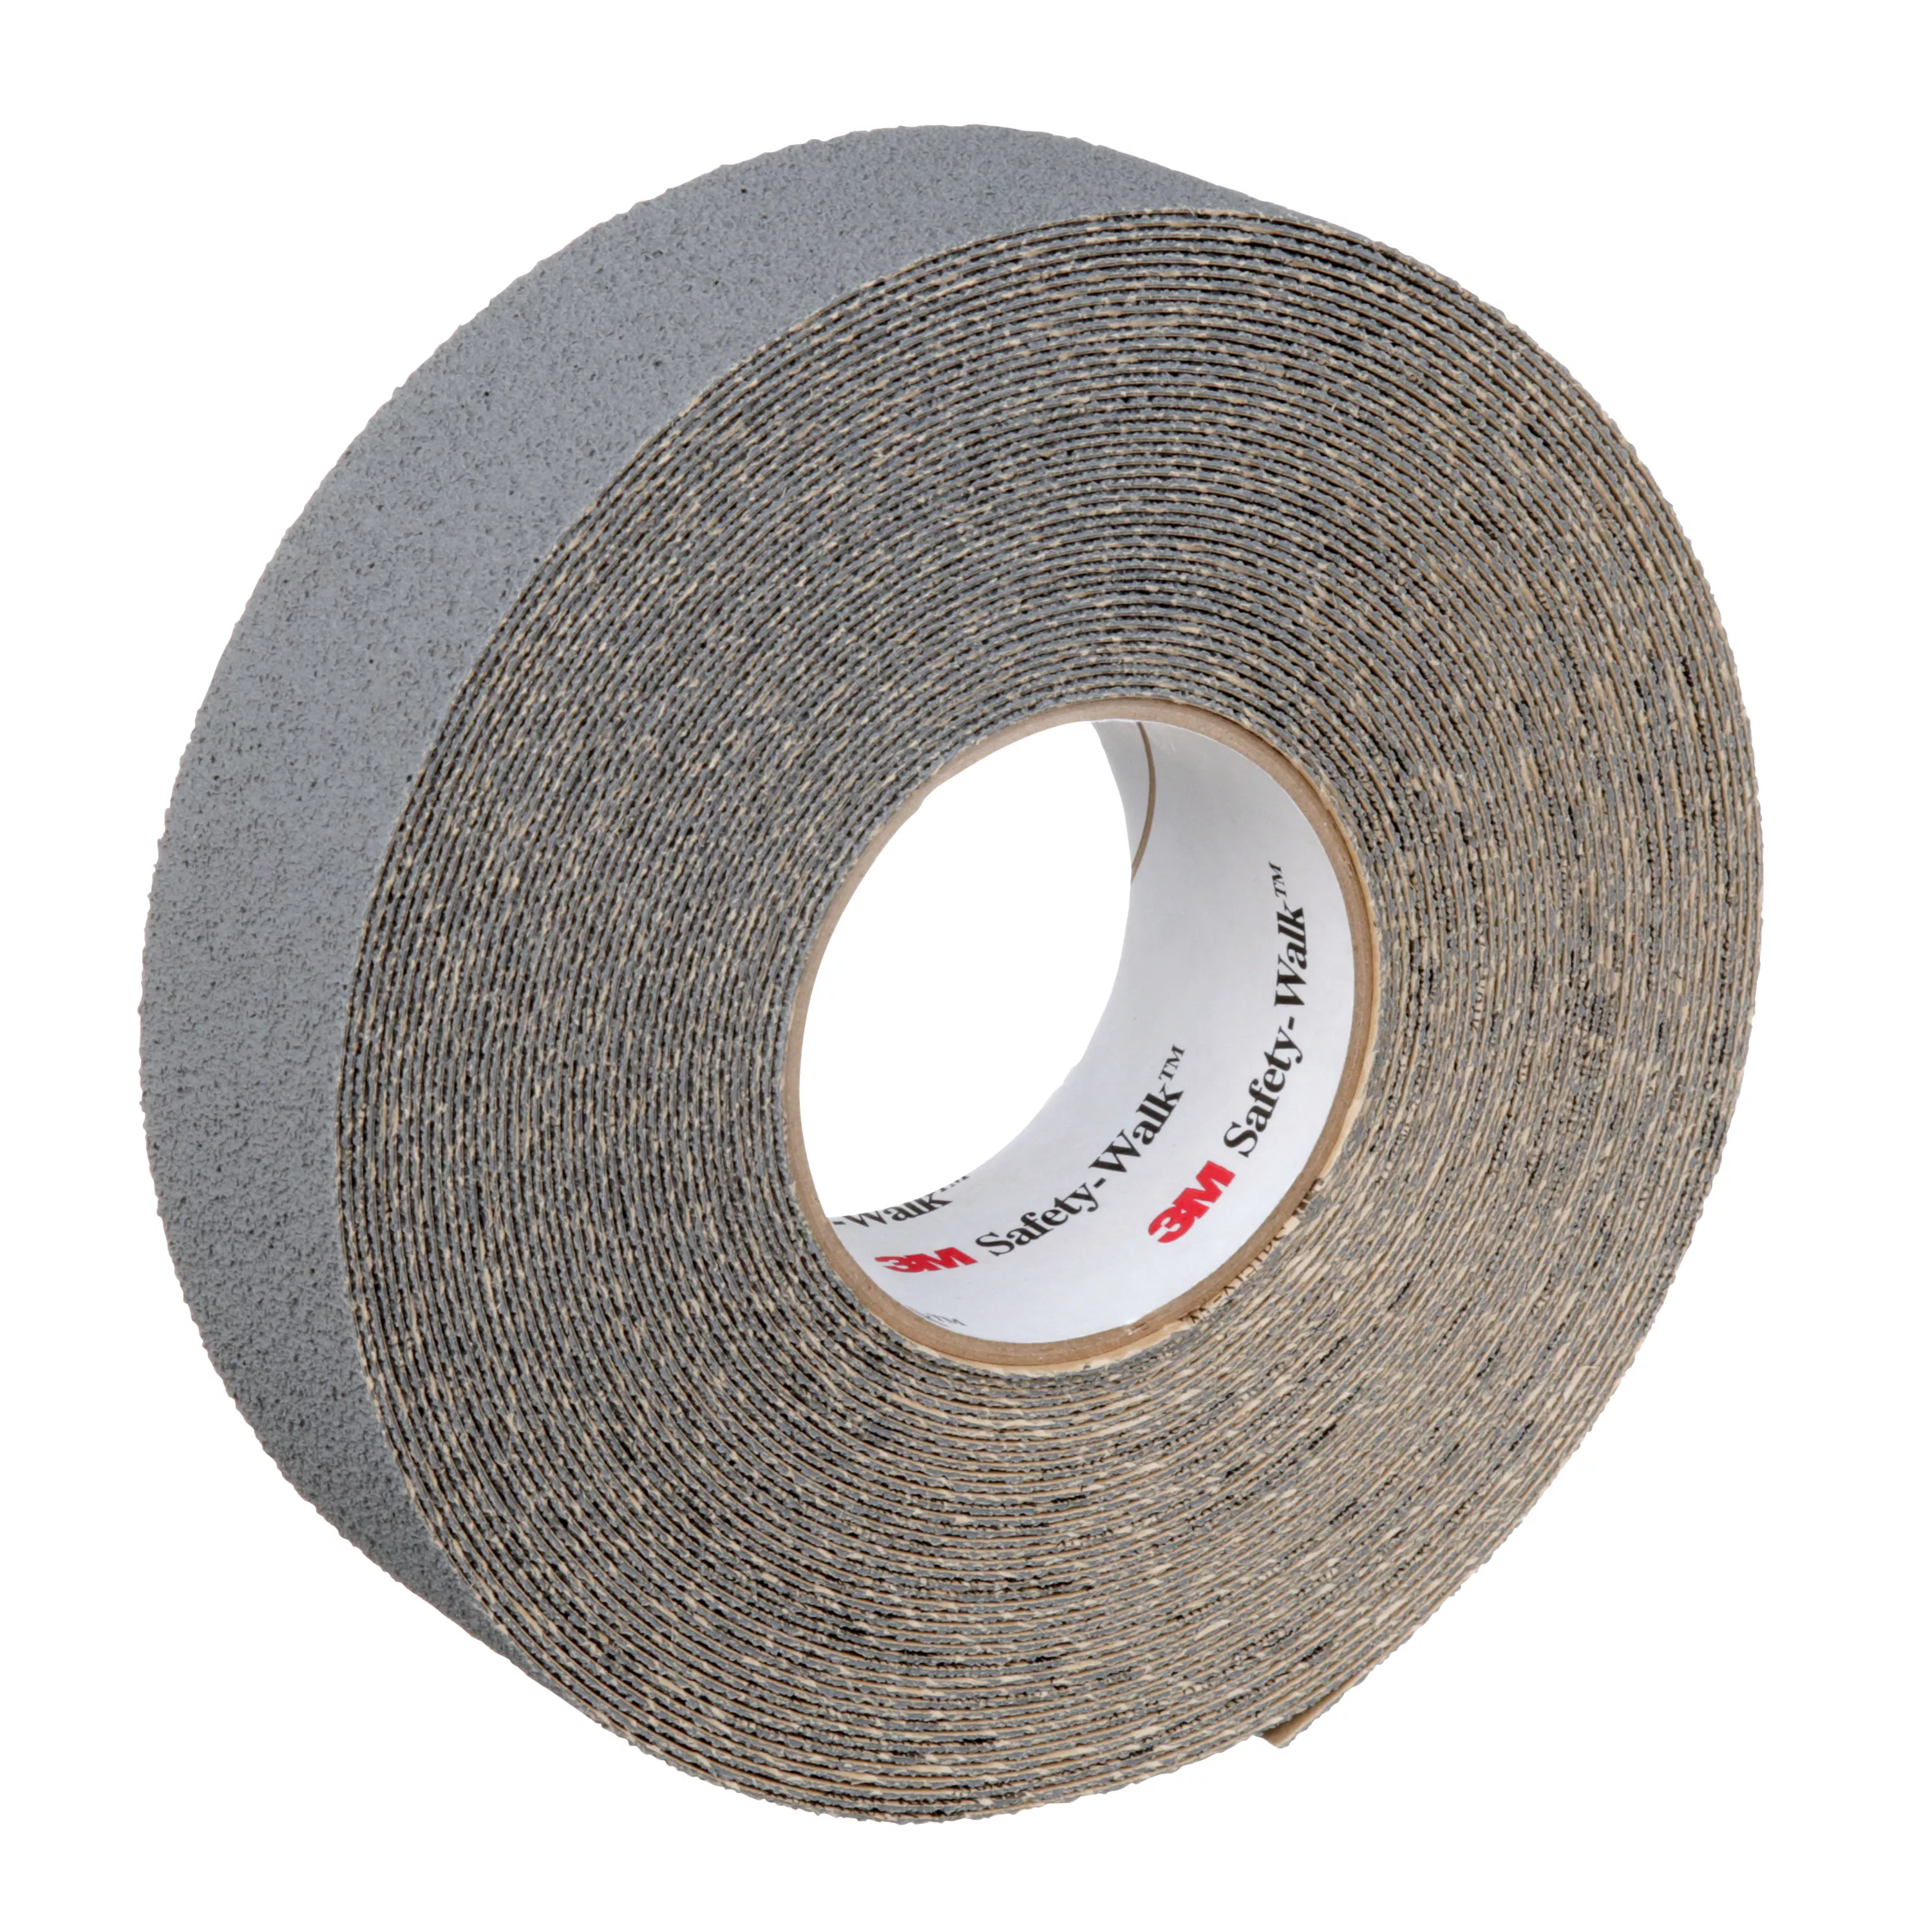 3M™ Safety-Walk™ Slip-Resistant Medium Resilient Tapes & Treads 370,
Gray, 2 in x 60 ft, Roll, 2/Case